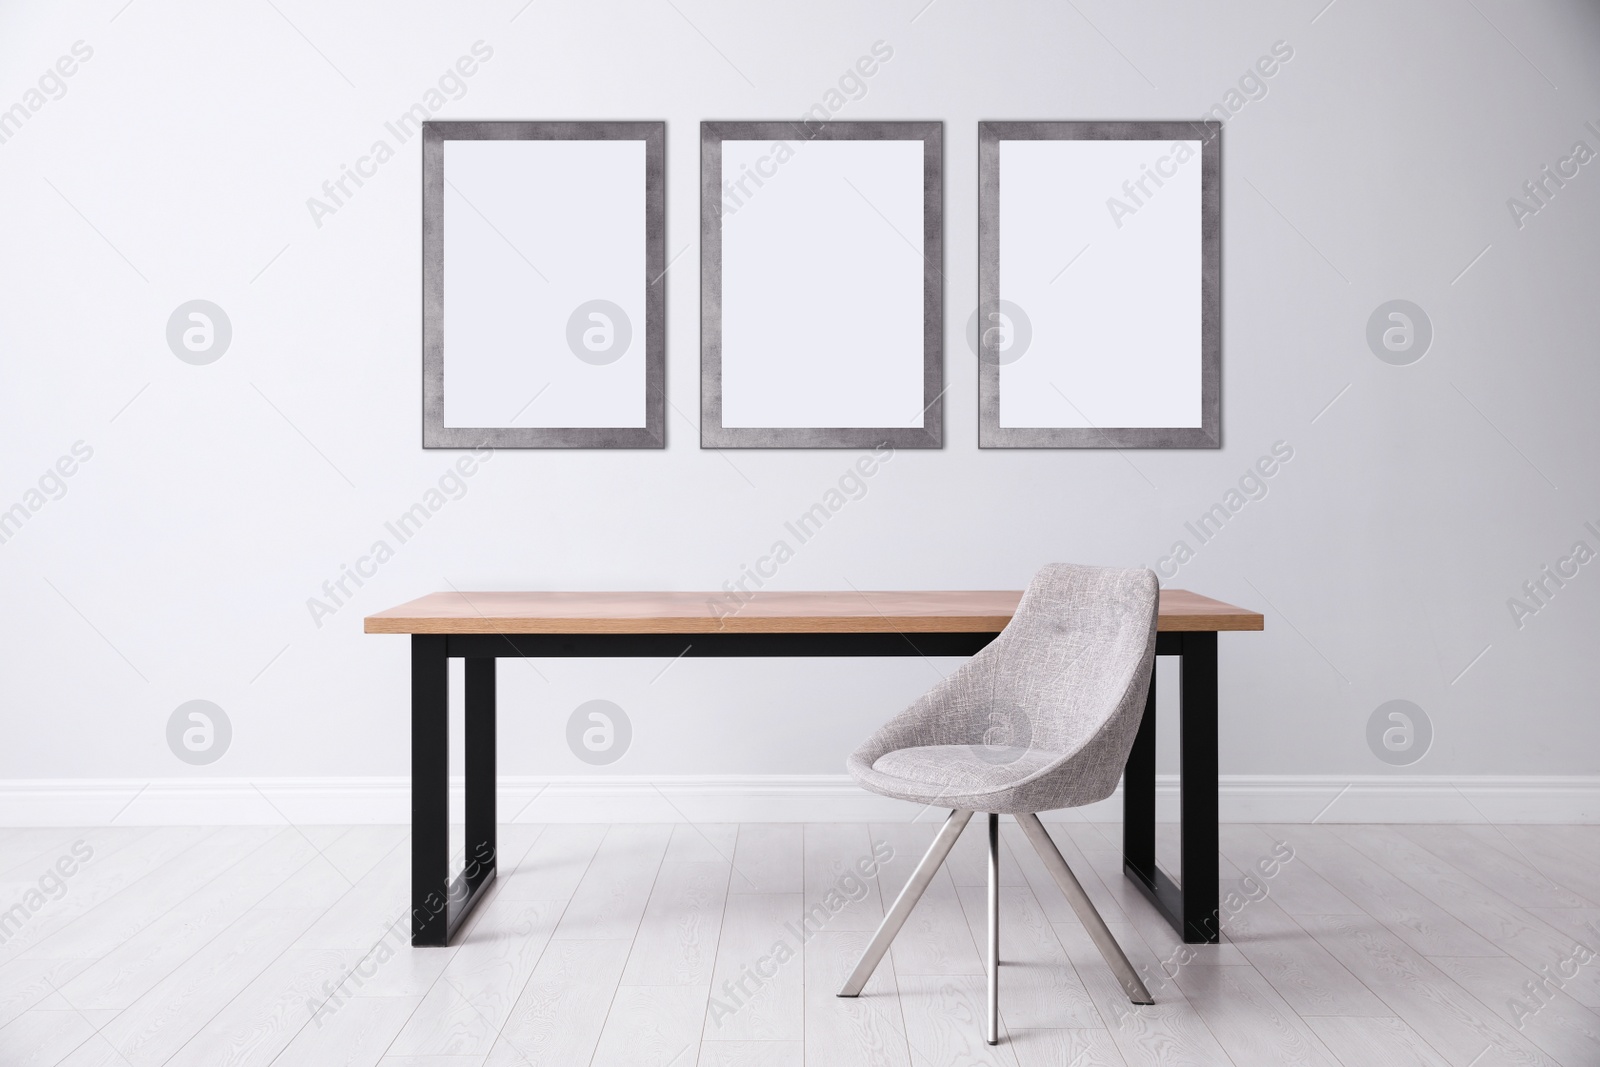 Image of Table and chair near light wall with empty posters. Mockup for design